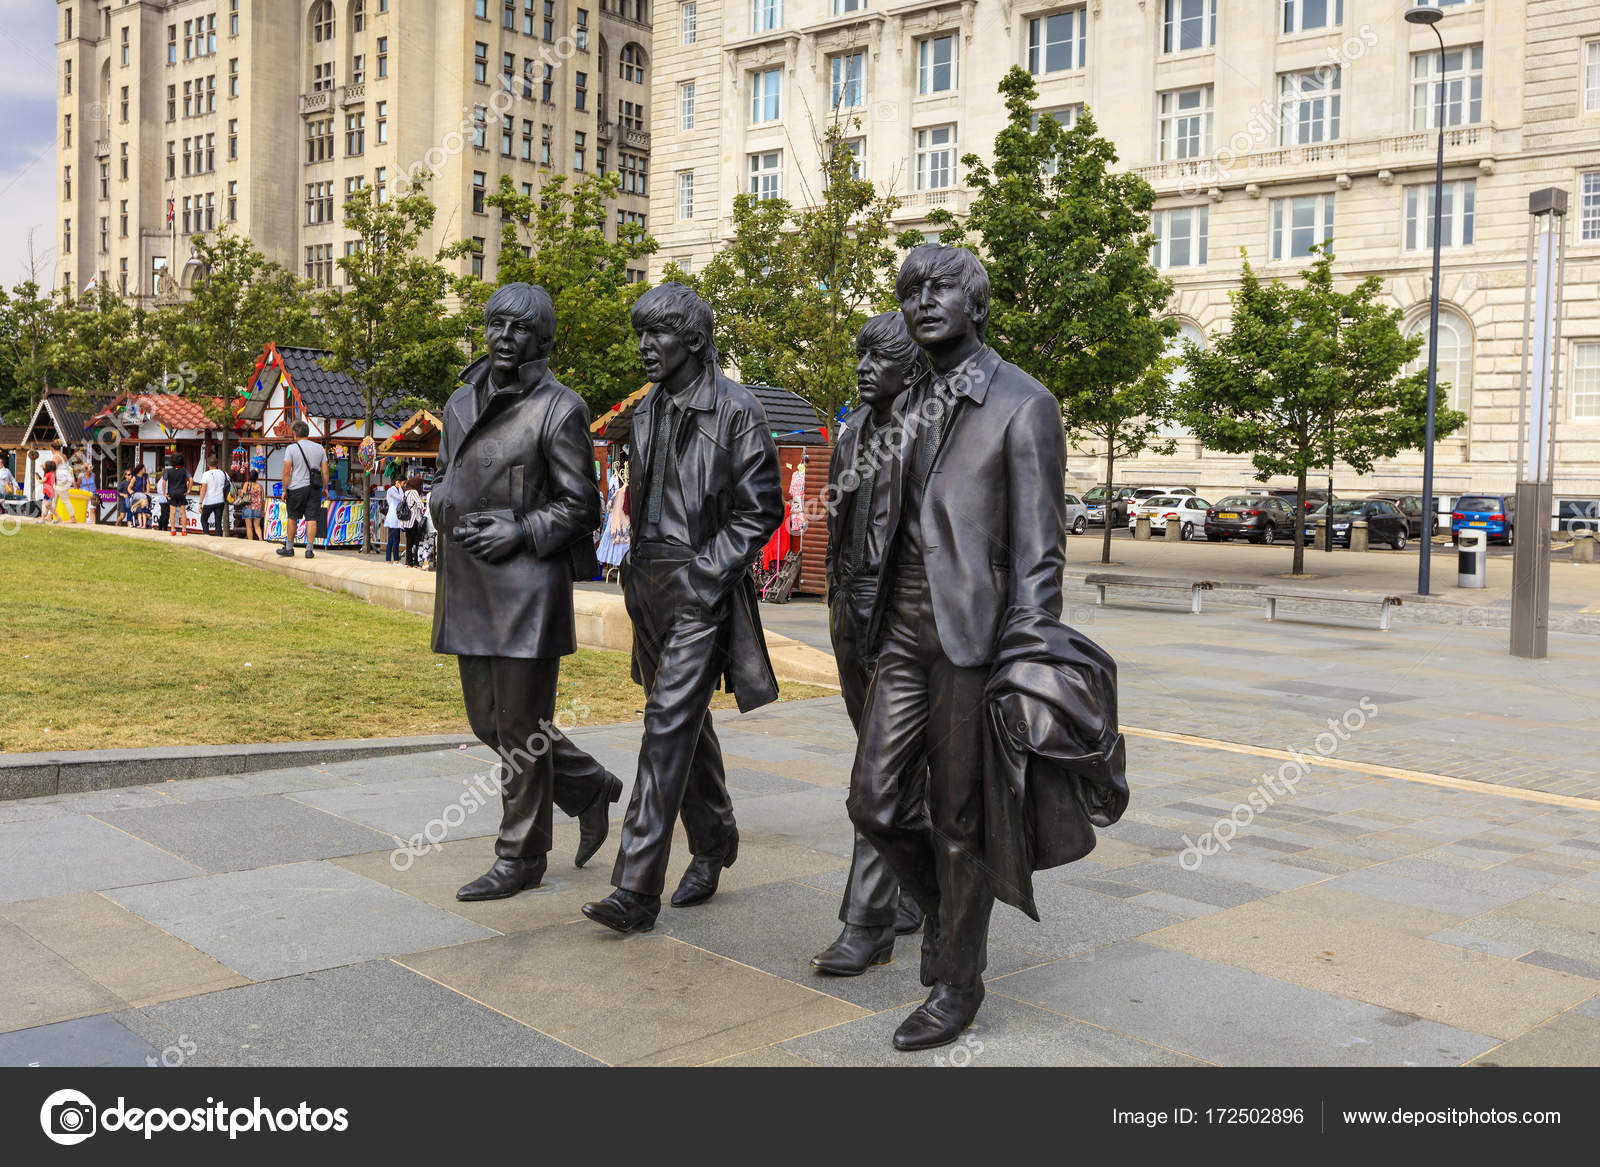 Beatles Statue At The Liverpool Waterfront Stock Editorial Photo C Debu55y 172502896